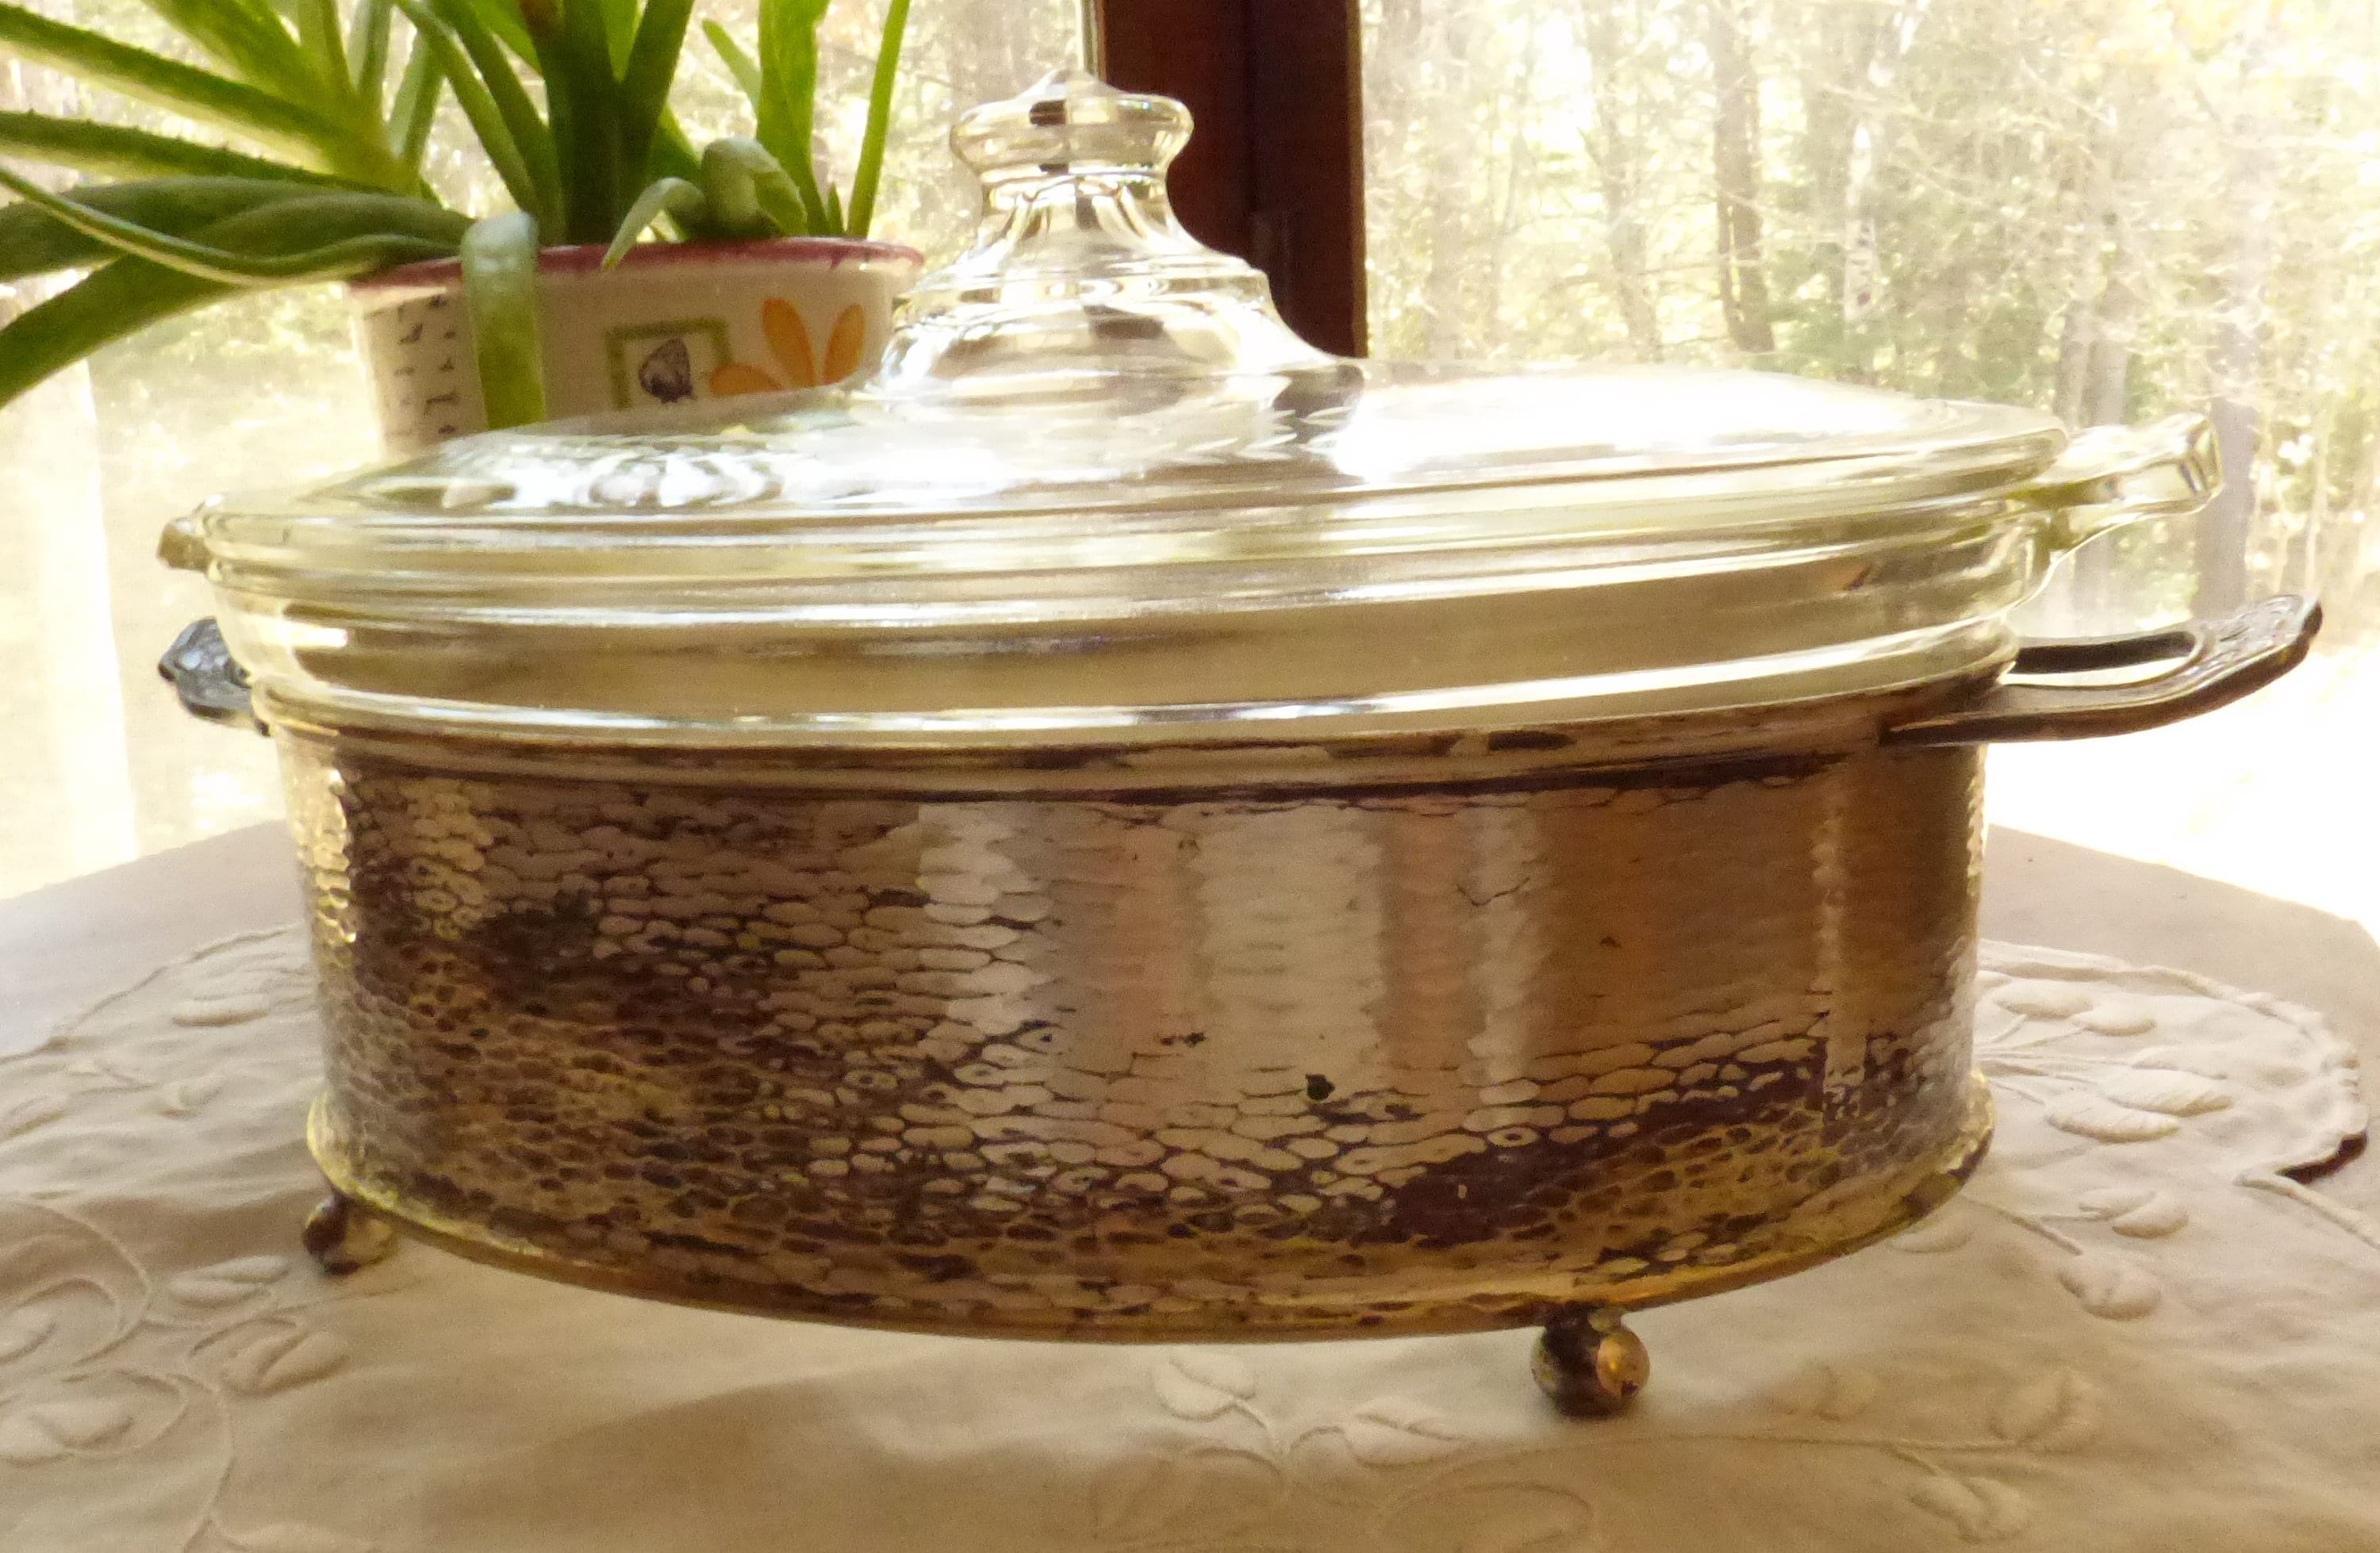 Pyrex Glass Casserole Oval Baking Dish, Floral Leaf Etched Lid Top